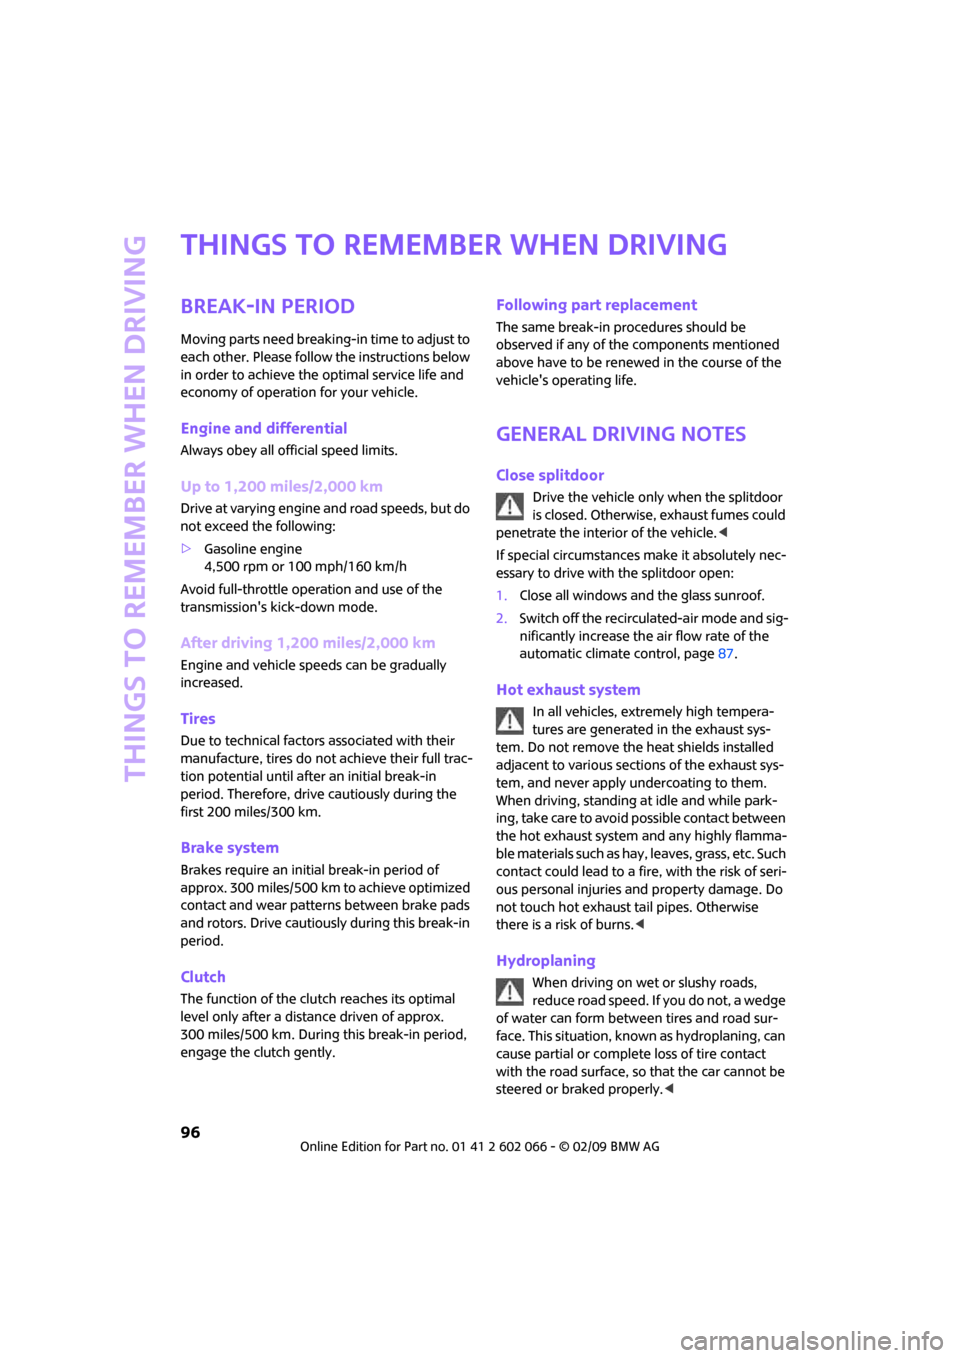 MINI Clubman 2009  Owners Manual (Mini Connected) Things to remember when driving
96
Things to remember when driving
Break-in period
Moving parts need breaking-in time to adjust to 
each other. Please follow the instructions below 
in order to achiev